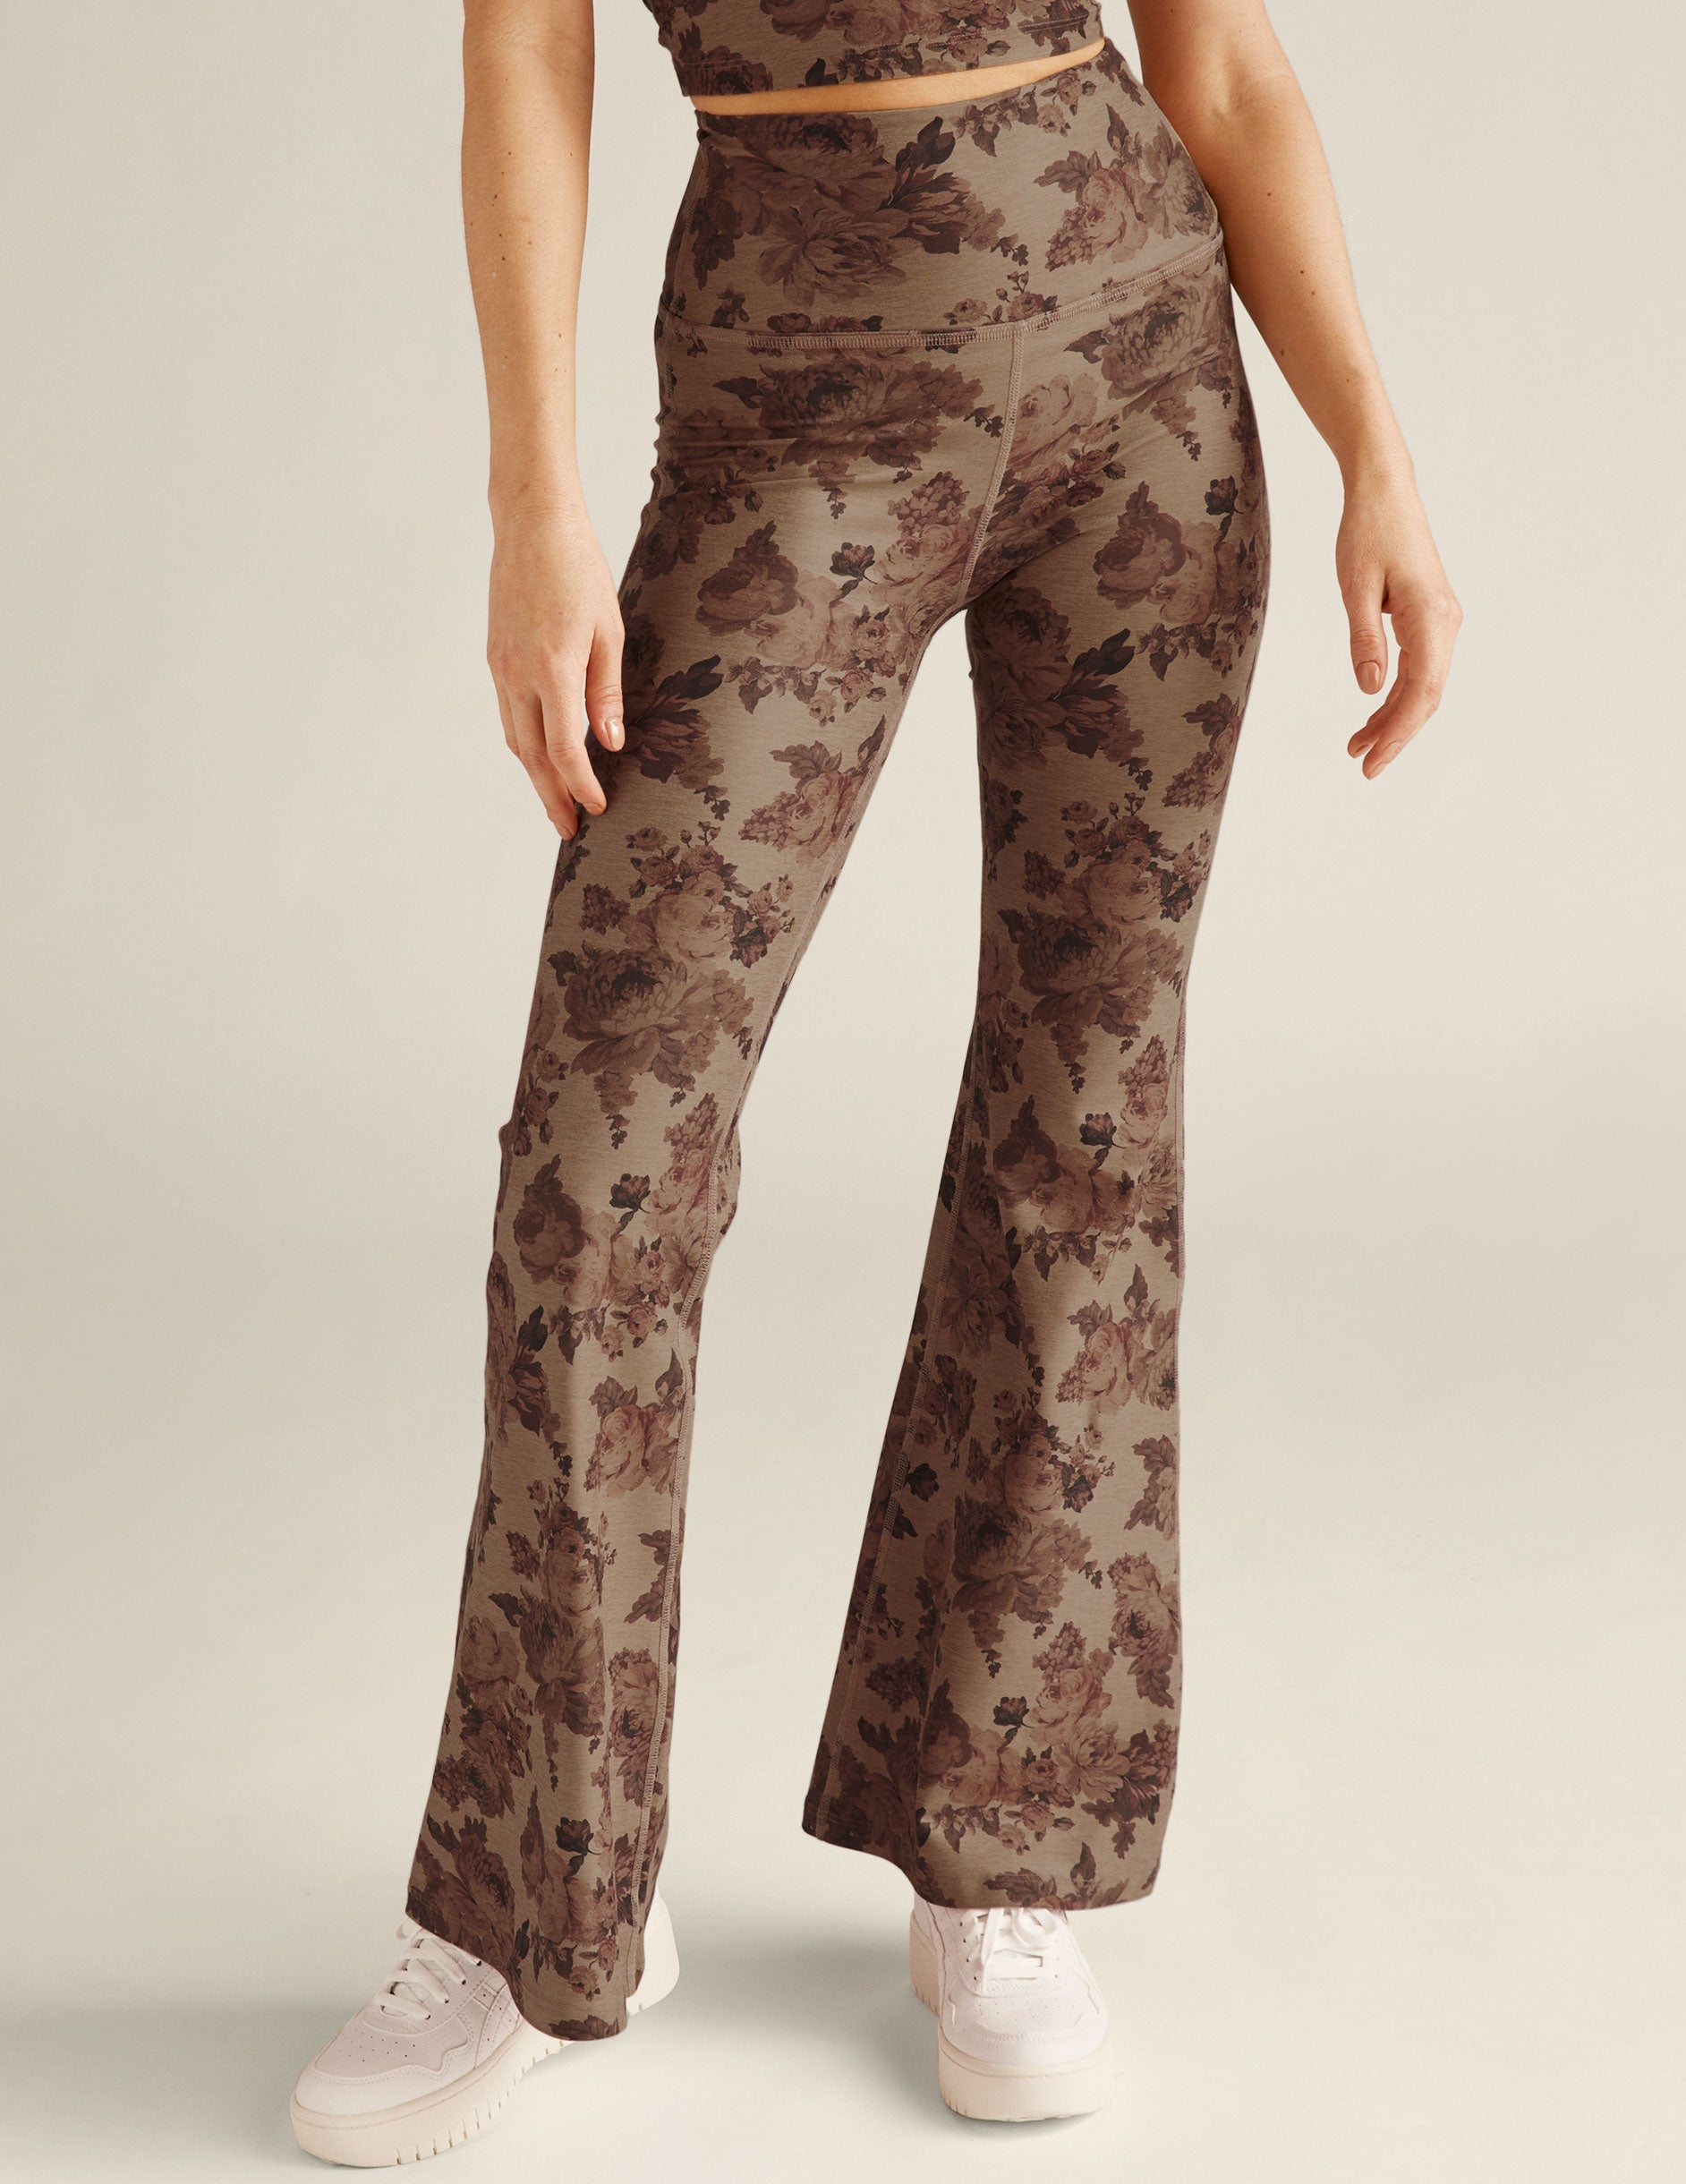 brown floral printed high-waisted flare leggings. 